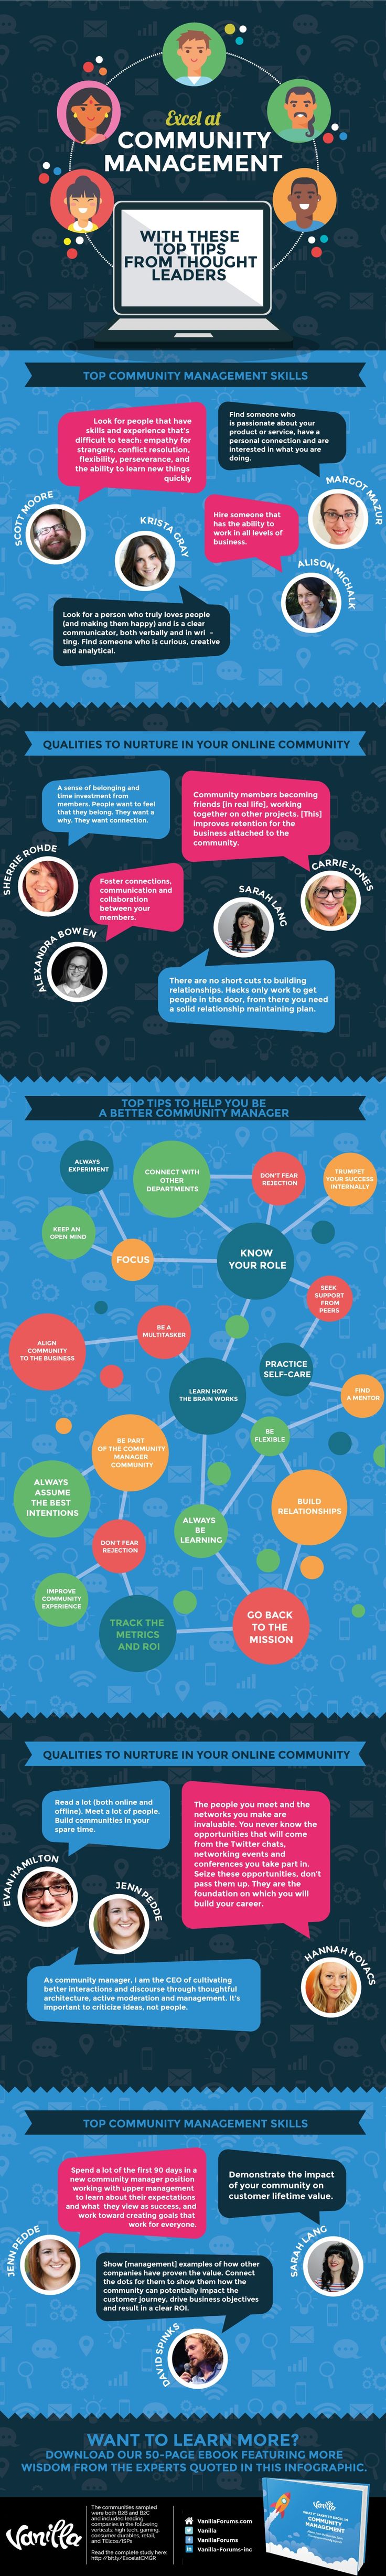 Digital-Marketing-infographic-How-to-Become-a-Great-Online-Community-Manager Digital Marketing : infographic: How to Become a Great Online Community Manager